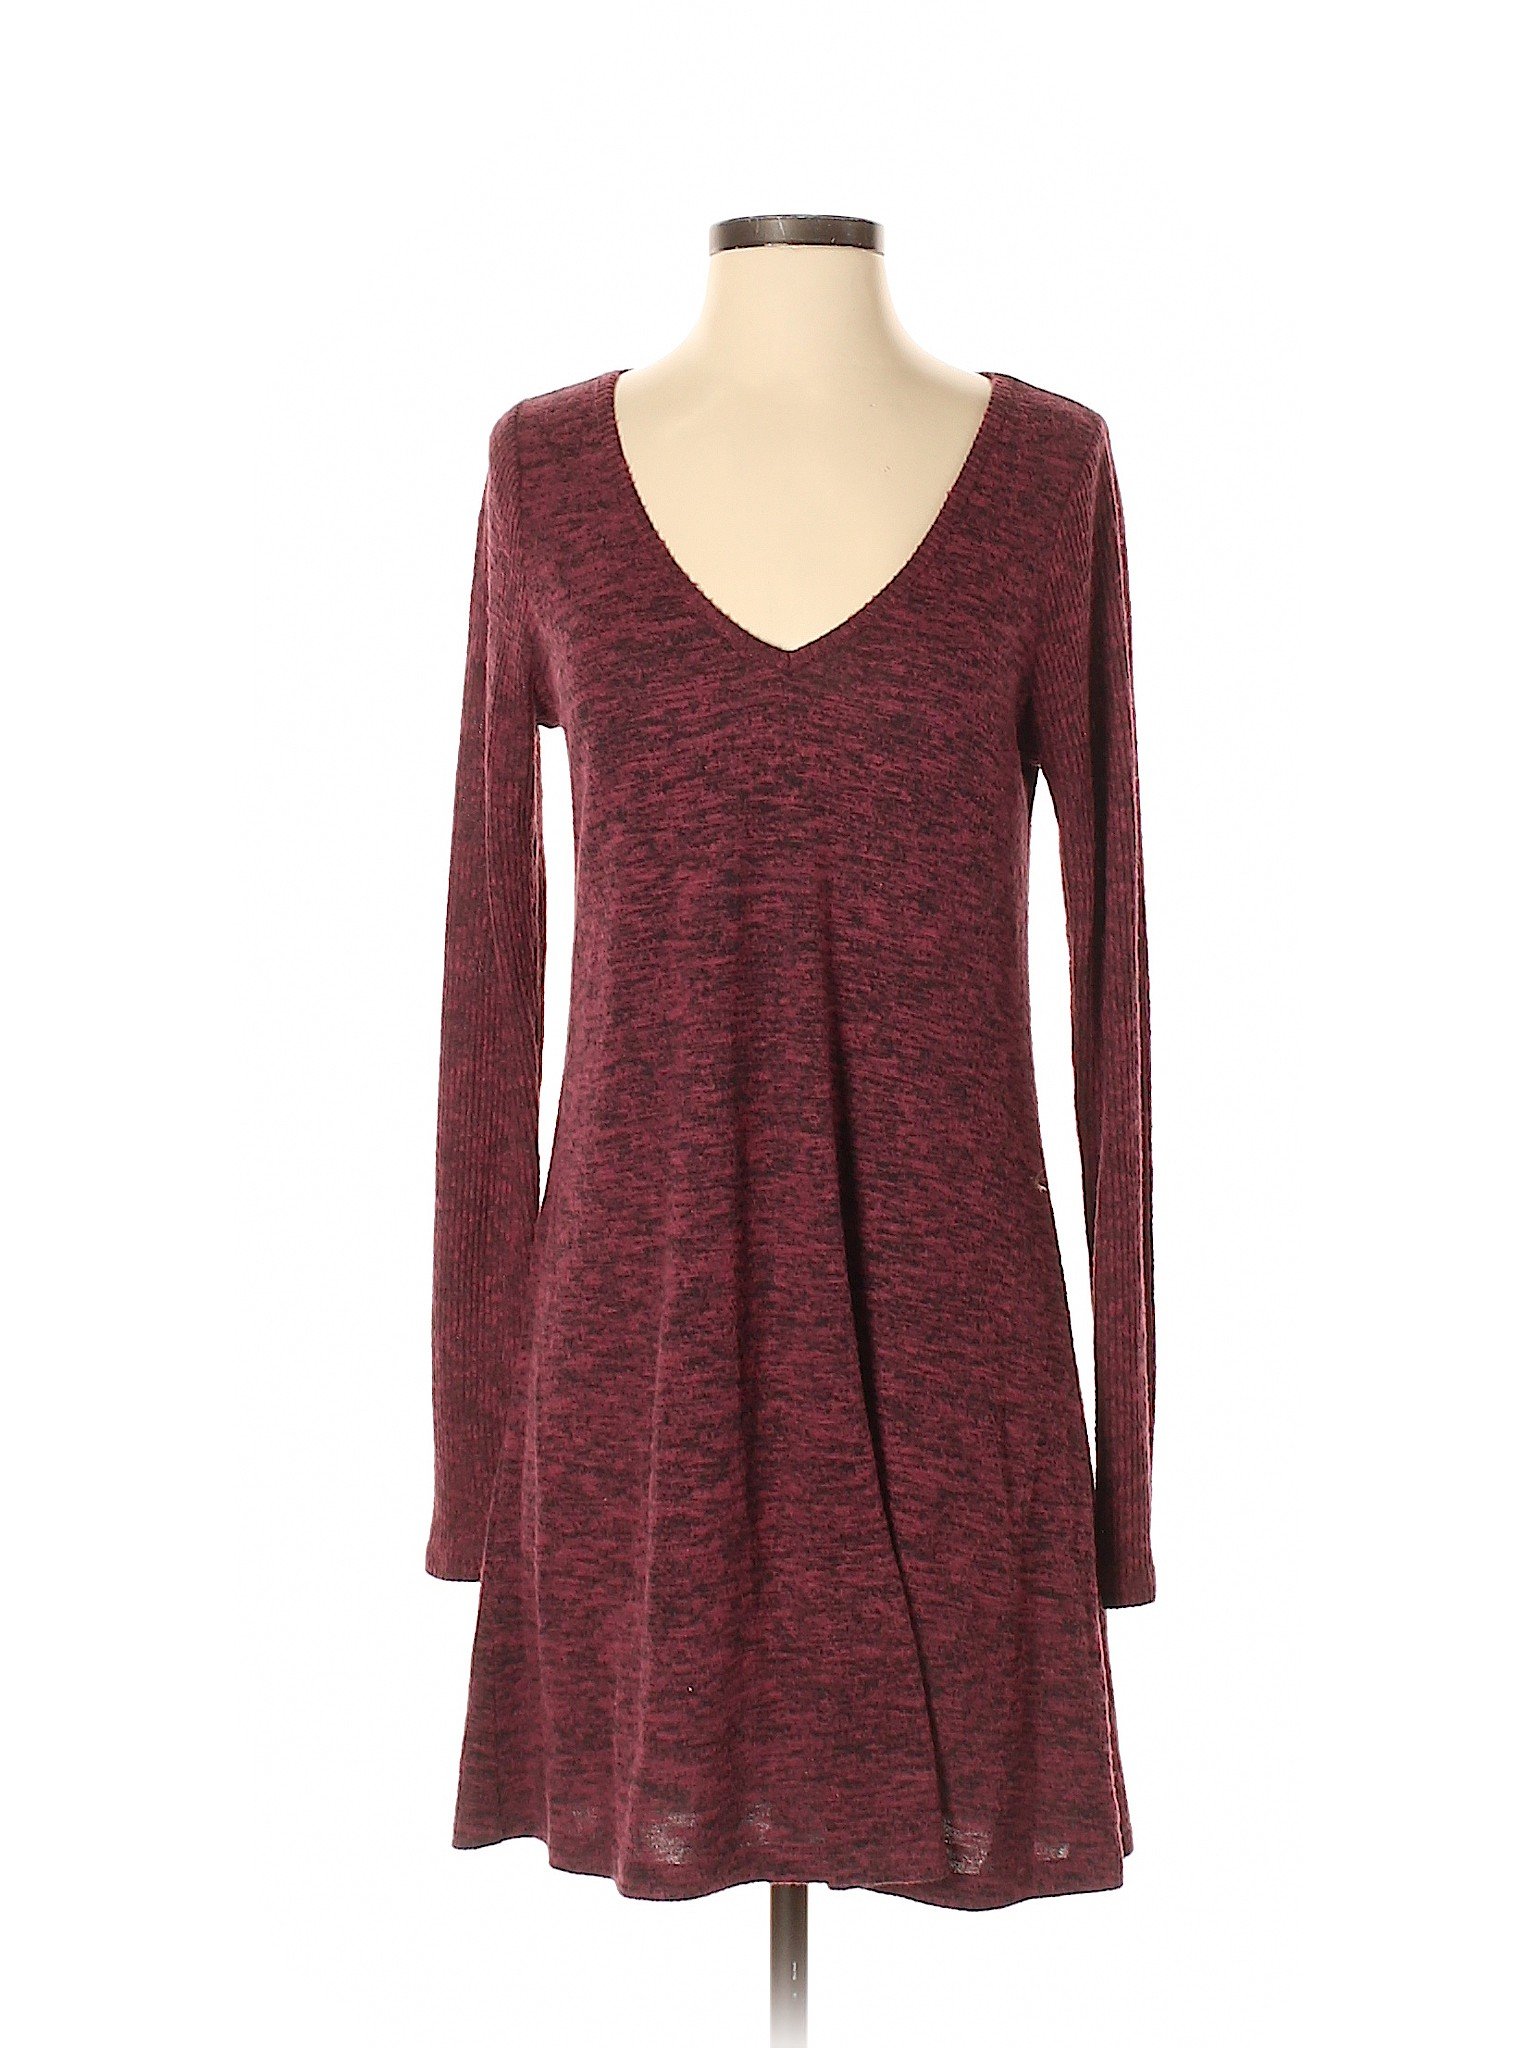 Express Solid Brown Casual Dress Size M - 90% off | thredUP